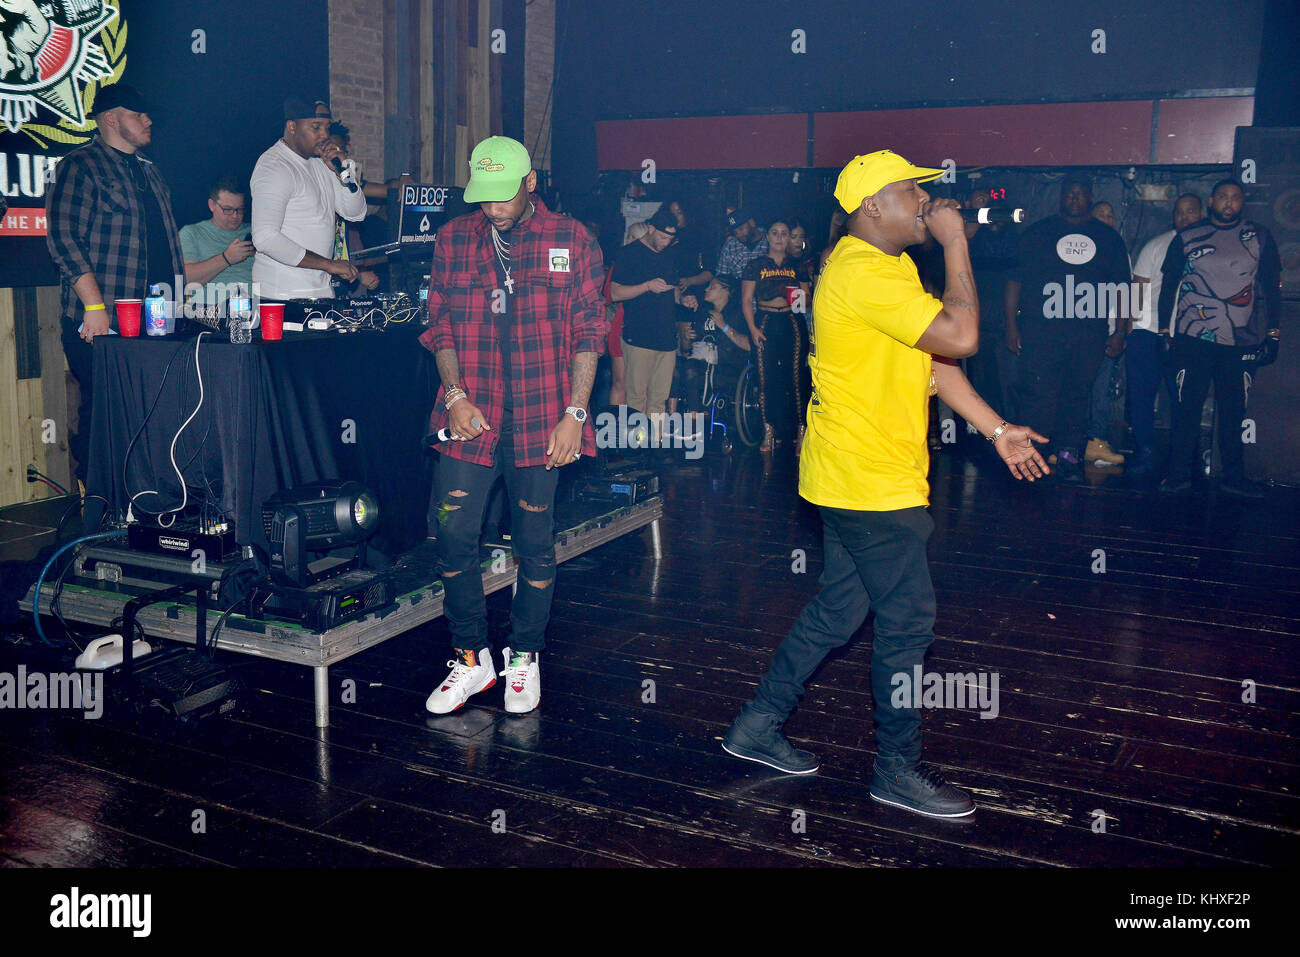 fort-lauderdale-fl-march-03-jadakiss-and-fabolous-perform-onstage-KHXF2P.jpg